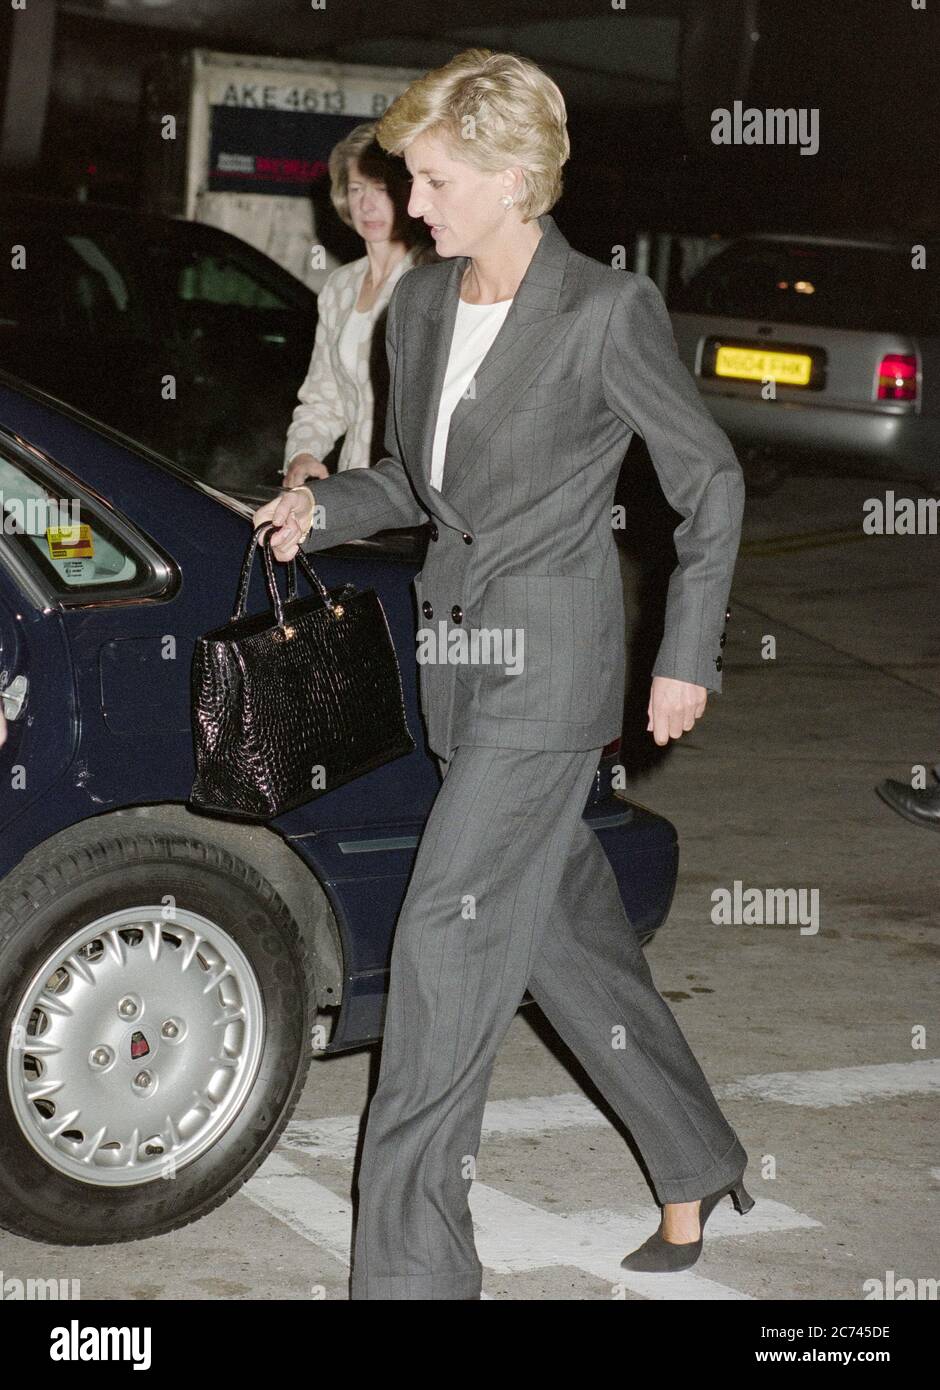 The Princess of Wales arriving at London's Heathrow Airport in September 1996. Stock Photo